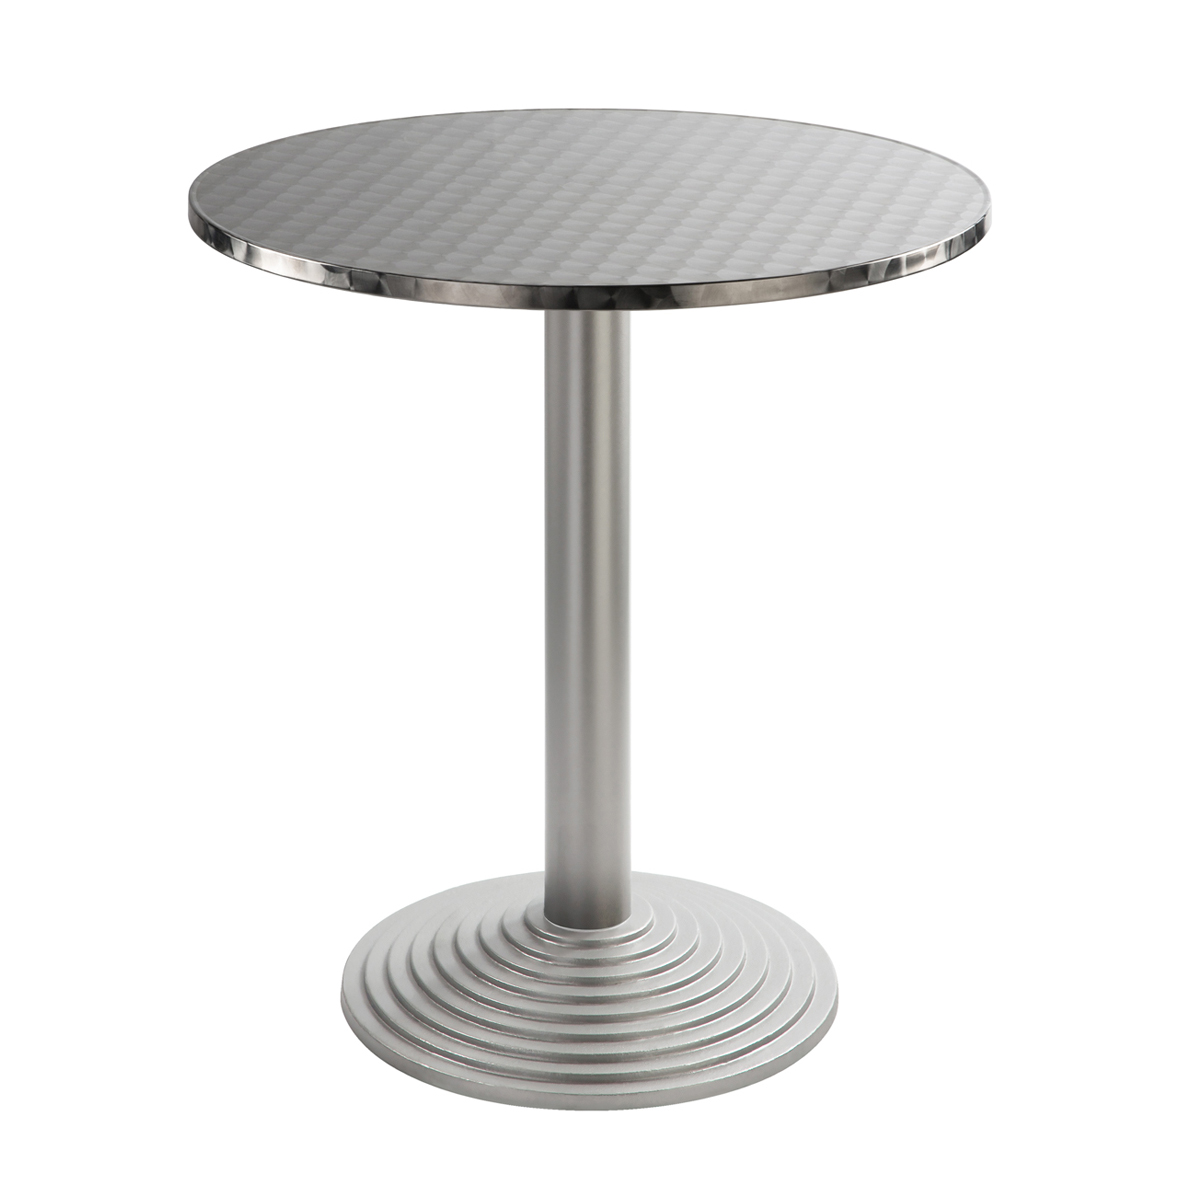 Table basse ronde argent